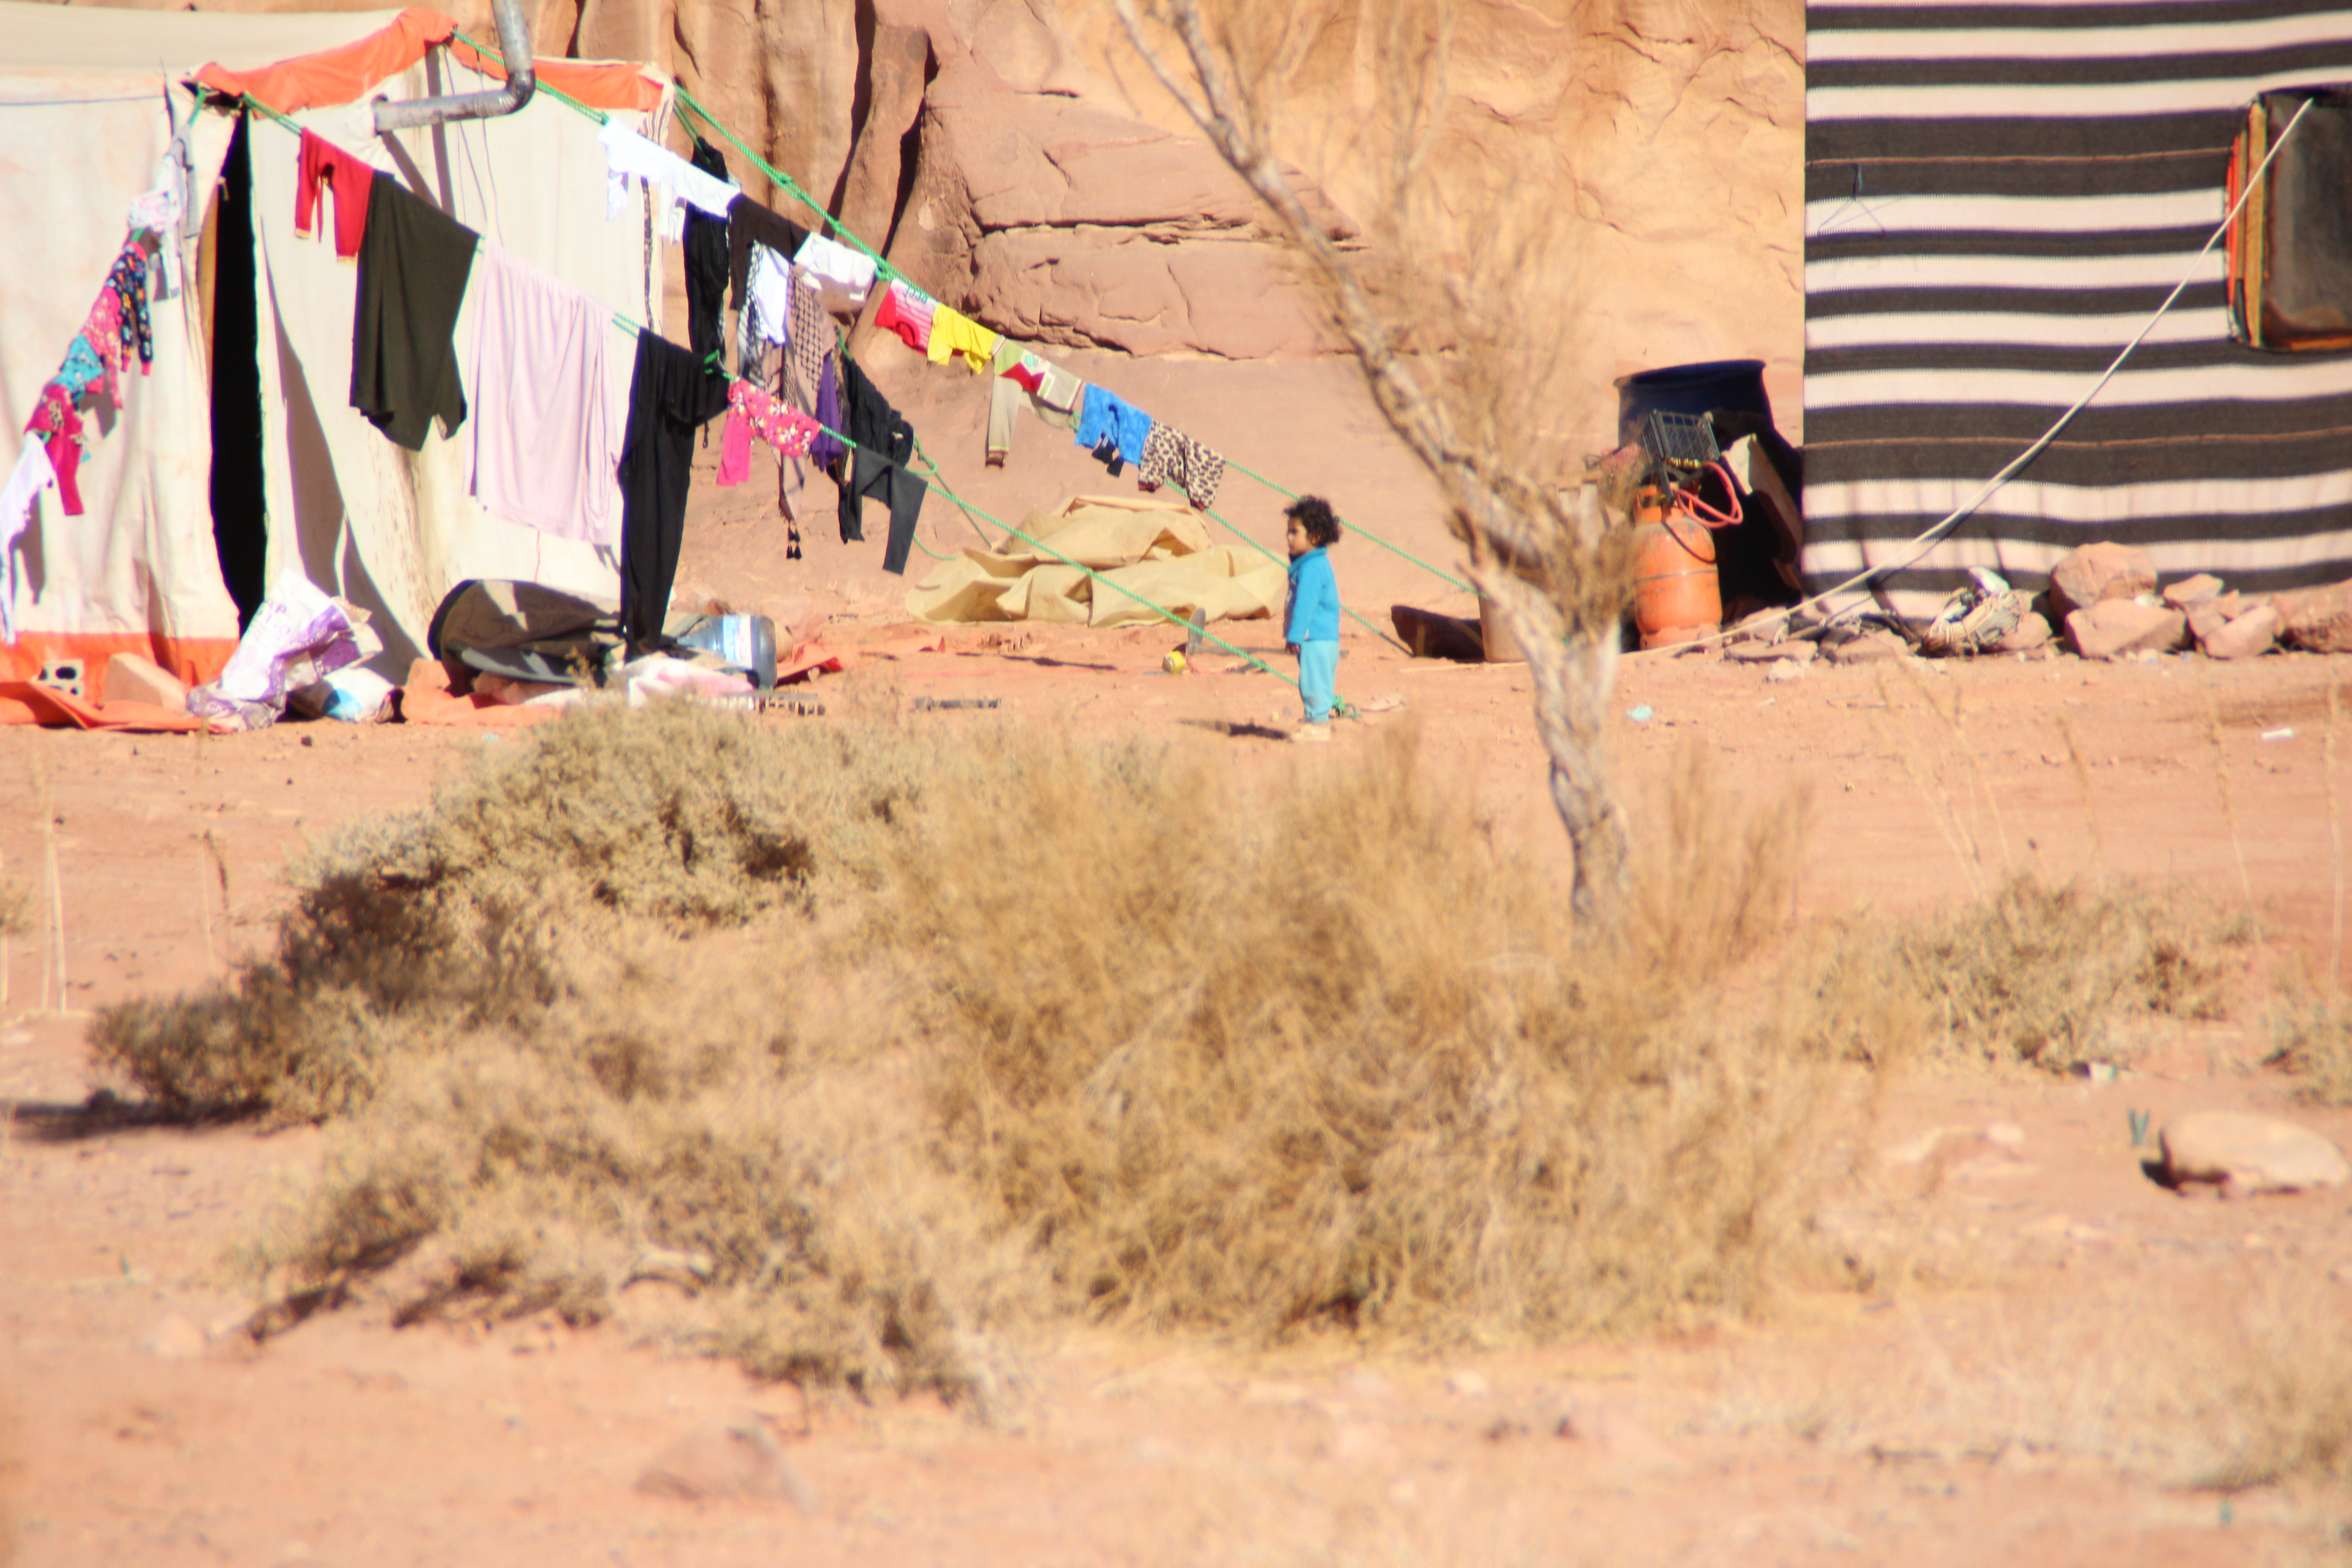 Kids playing in a settlement in Wadi Rum